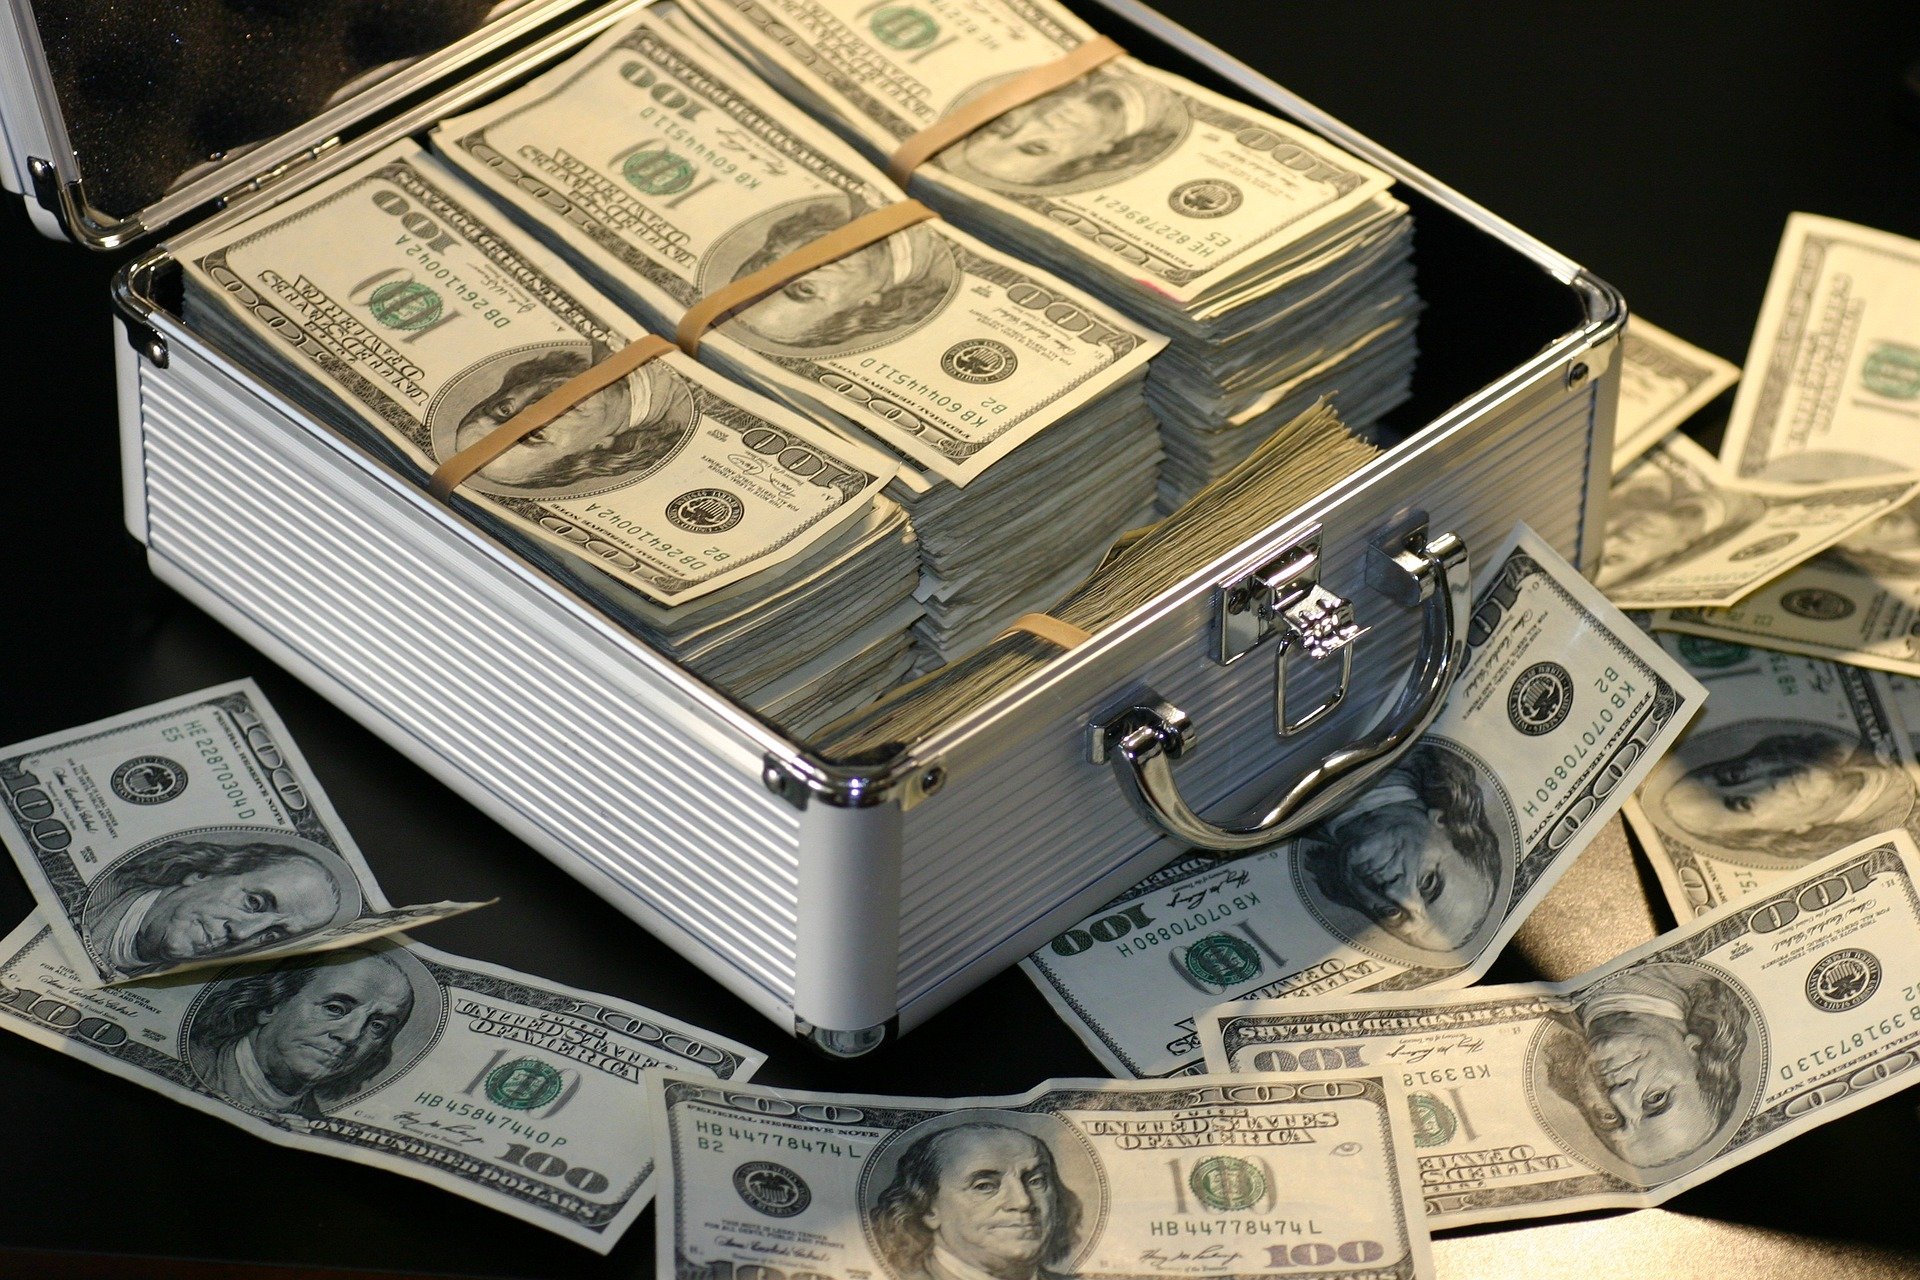 Pictured - A suitcase full of money | Source: Pixabay